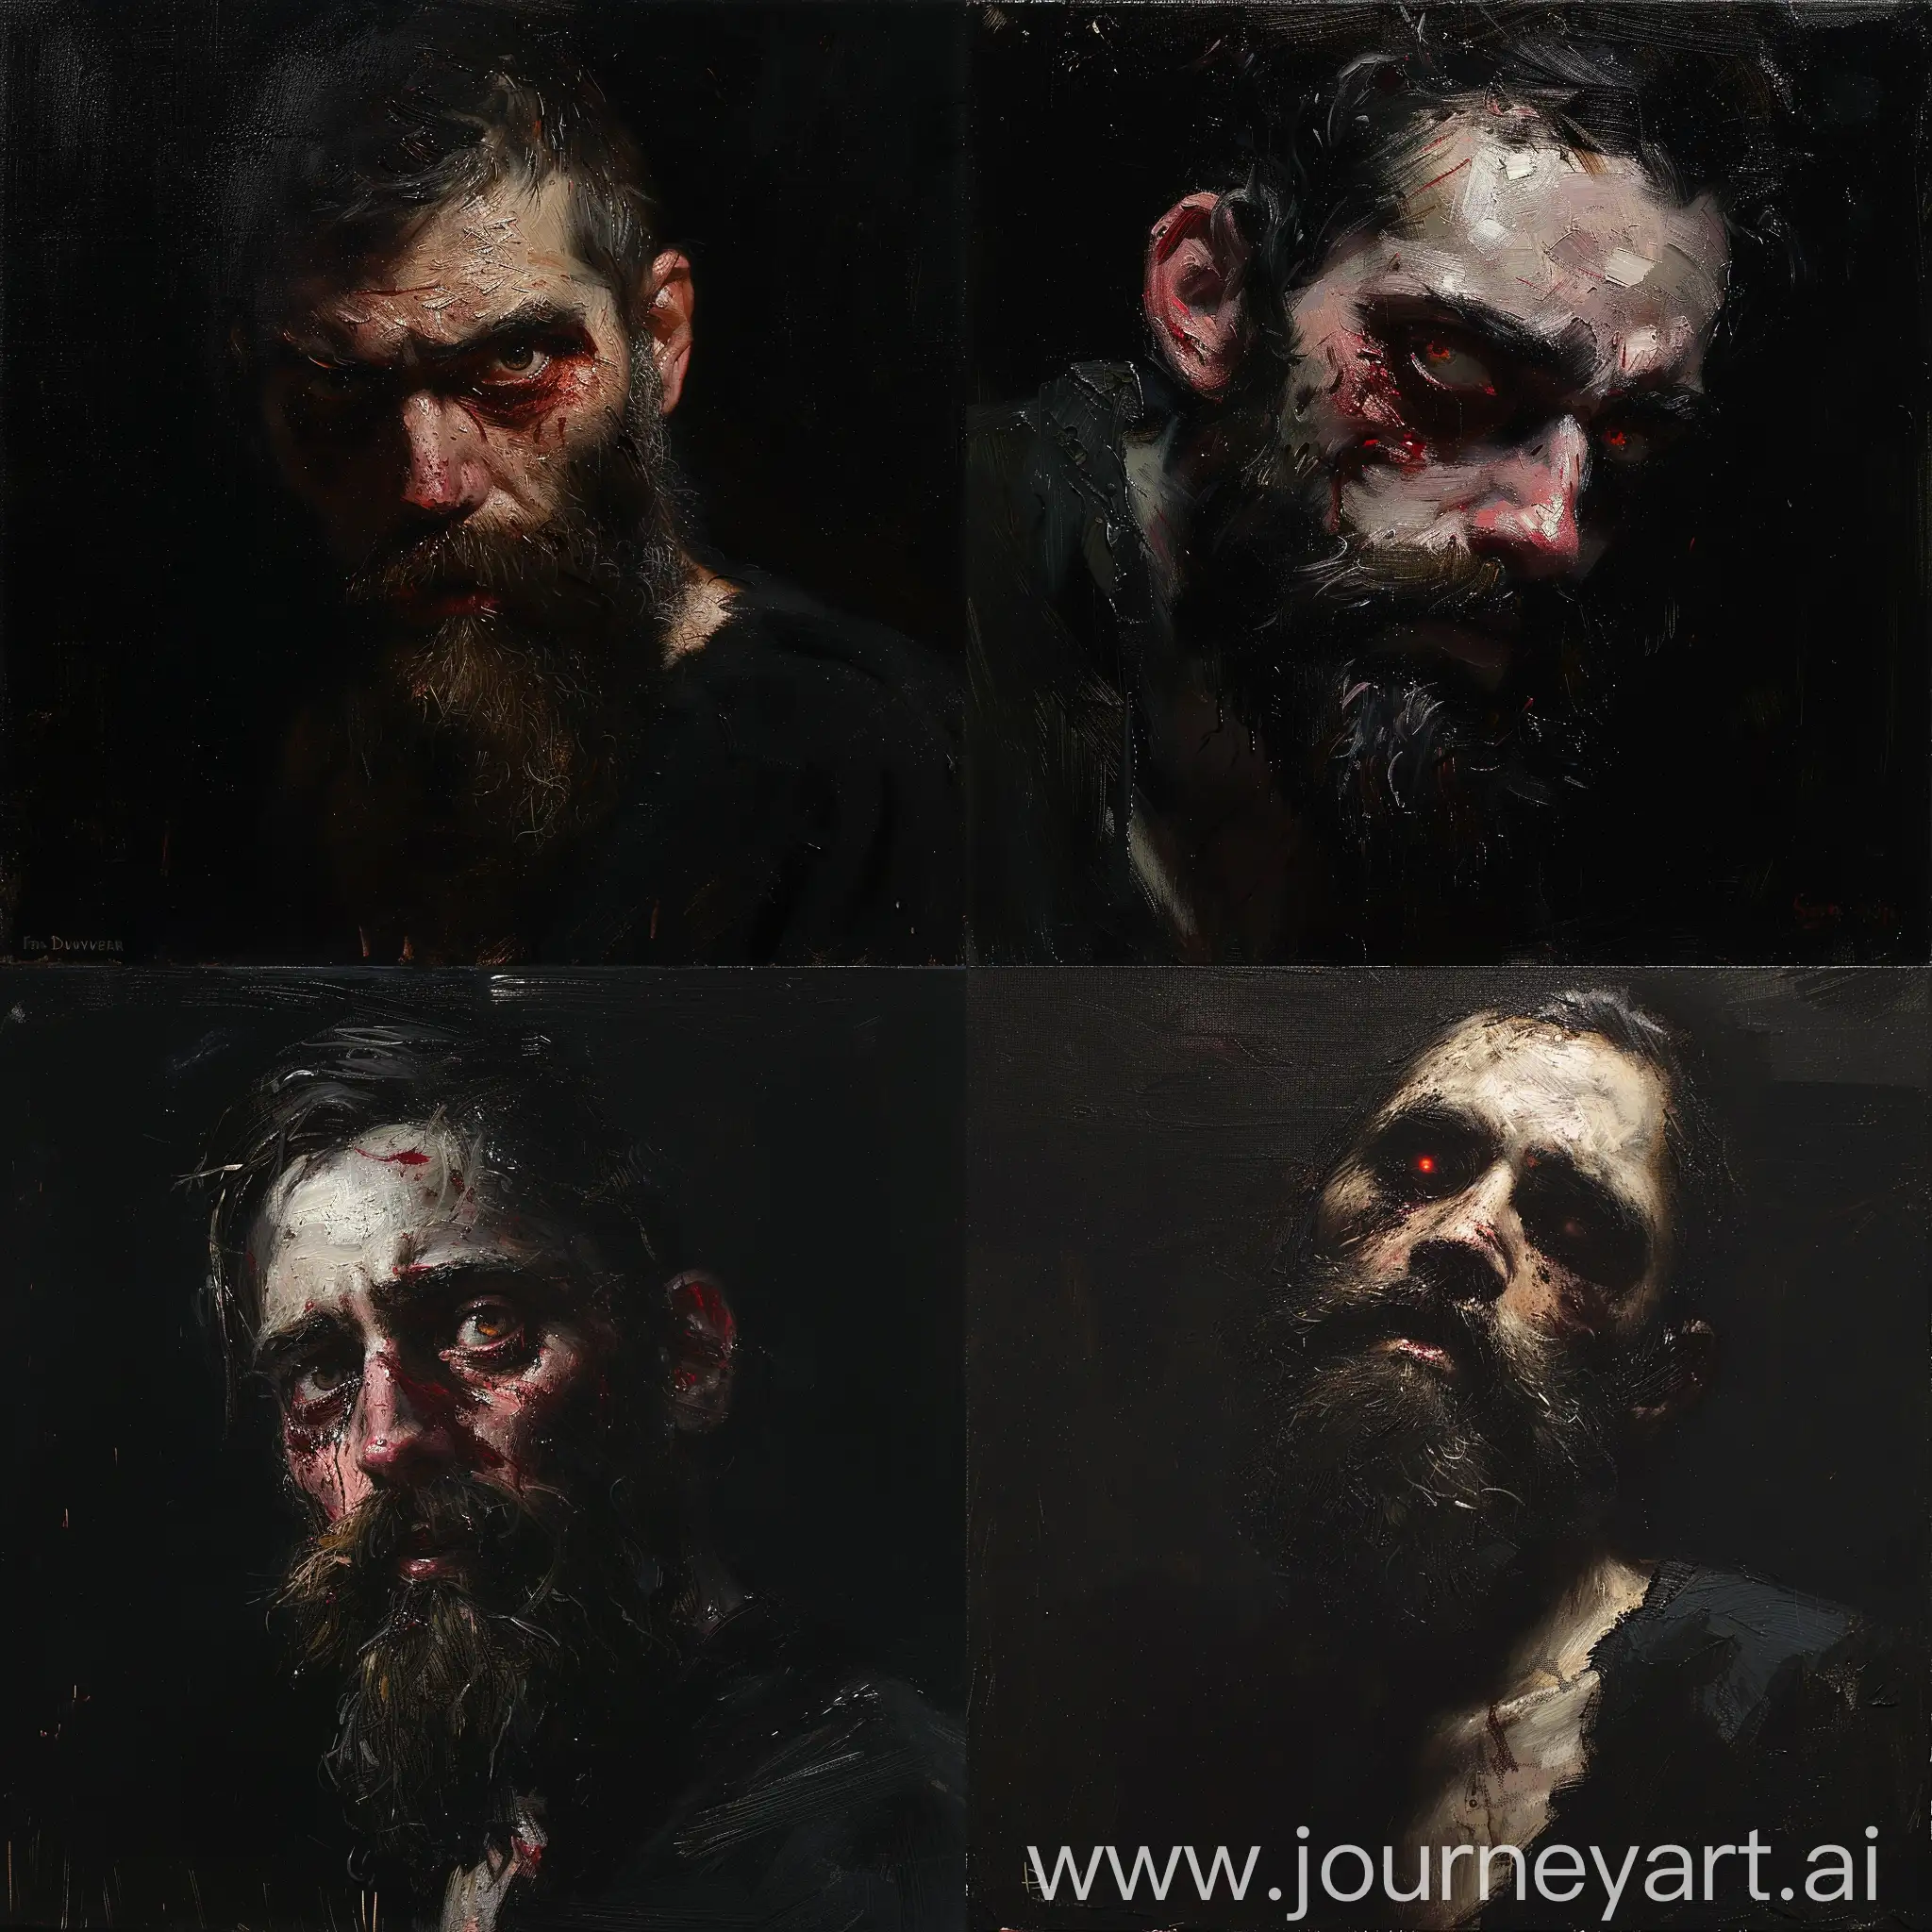 Dark painting of a bearded man with bloody eyes by Frank Duveneck, Oil sketch, wlop John singer Sargent, jeremy lipkin and rob rey, range murata jeremy lipking, John singer Sargent, black background, jeremy lipkin, lensculture portrait awards, casey baugh and james jean, detailed realism in painting, award-winning portrait, amazingly detailed oil painting, brushstrokes, Sean cheetham, details, well painted, good colors, strong shadows, black background 